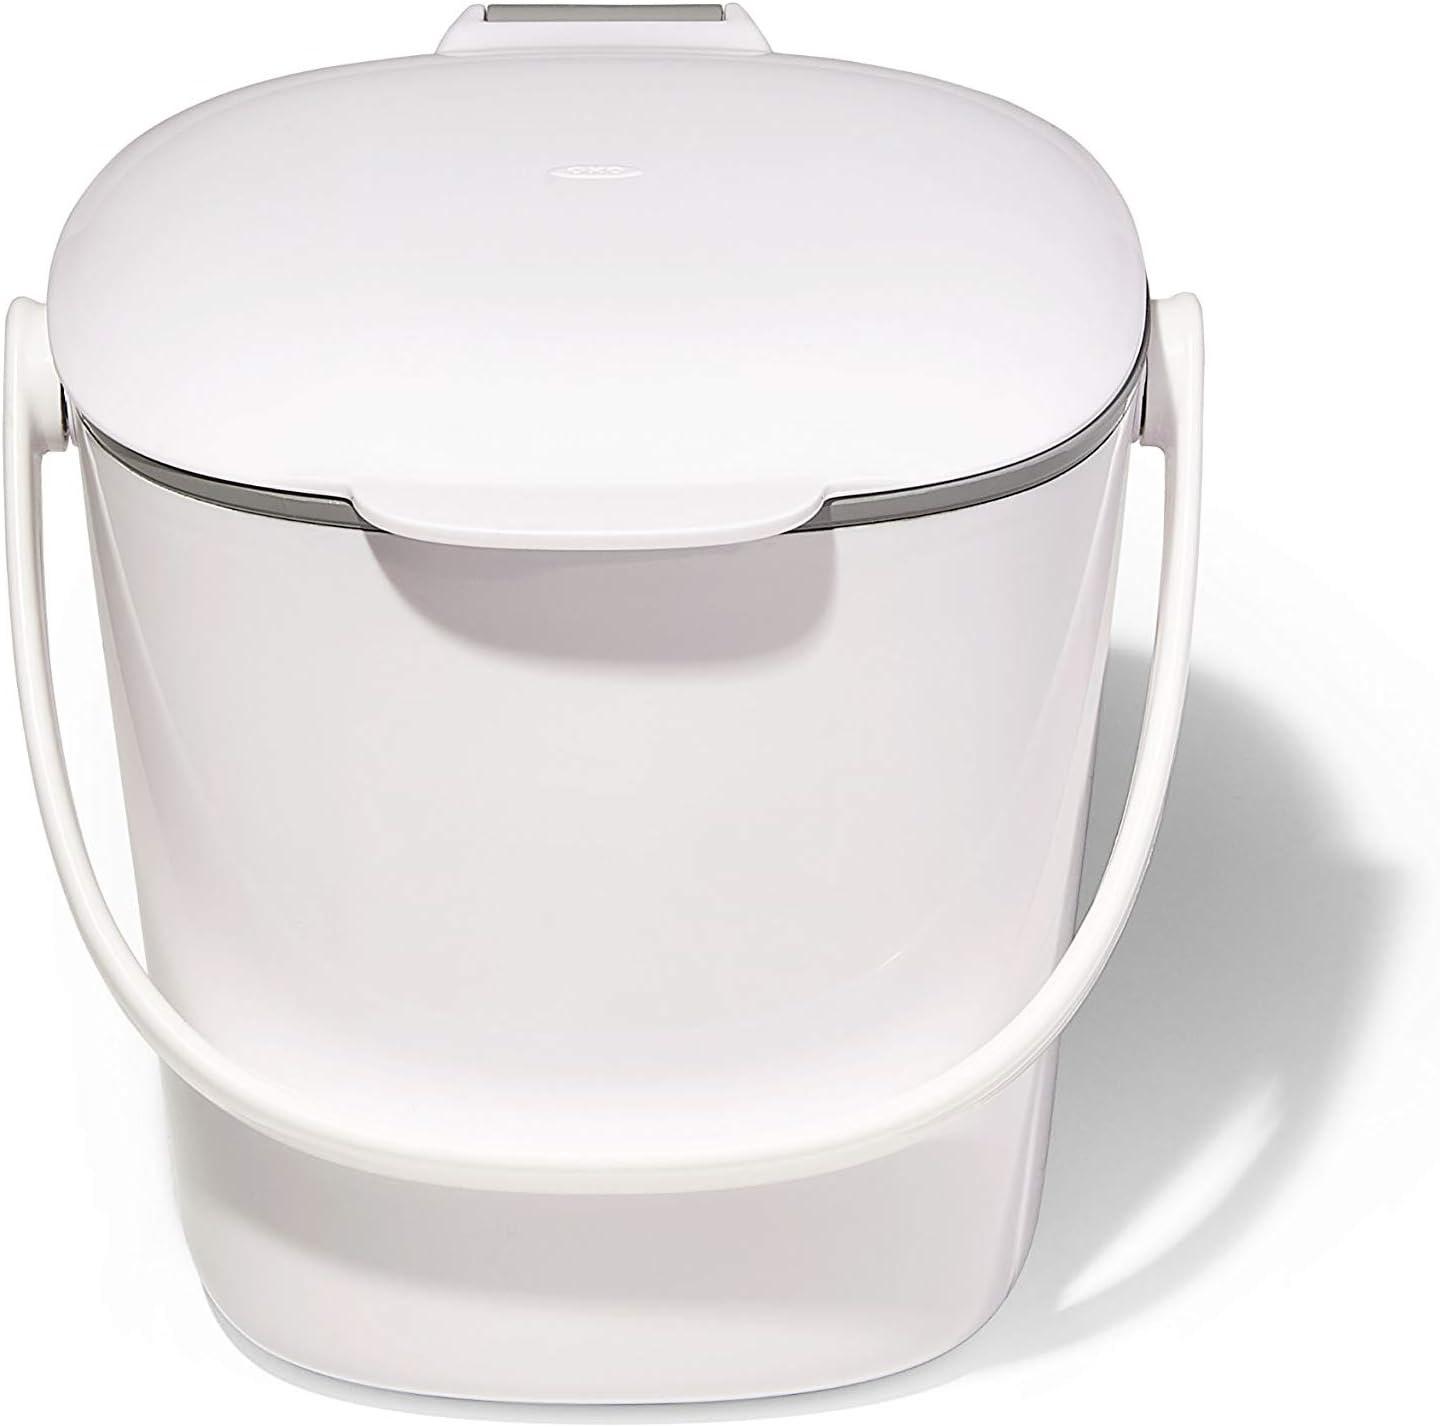 #1 Best OXO Good Grips Easy-Clean Compost Bin Review